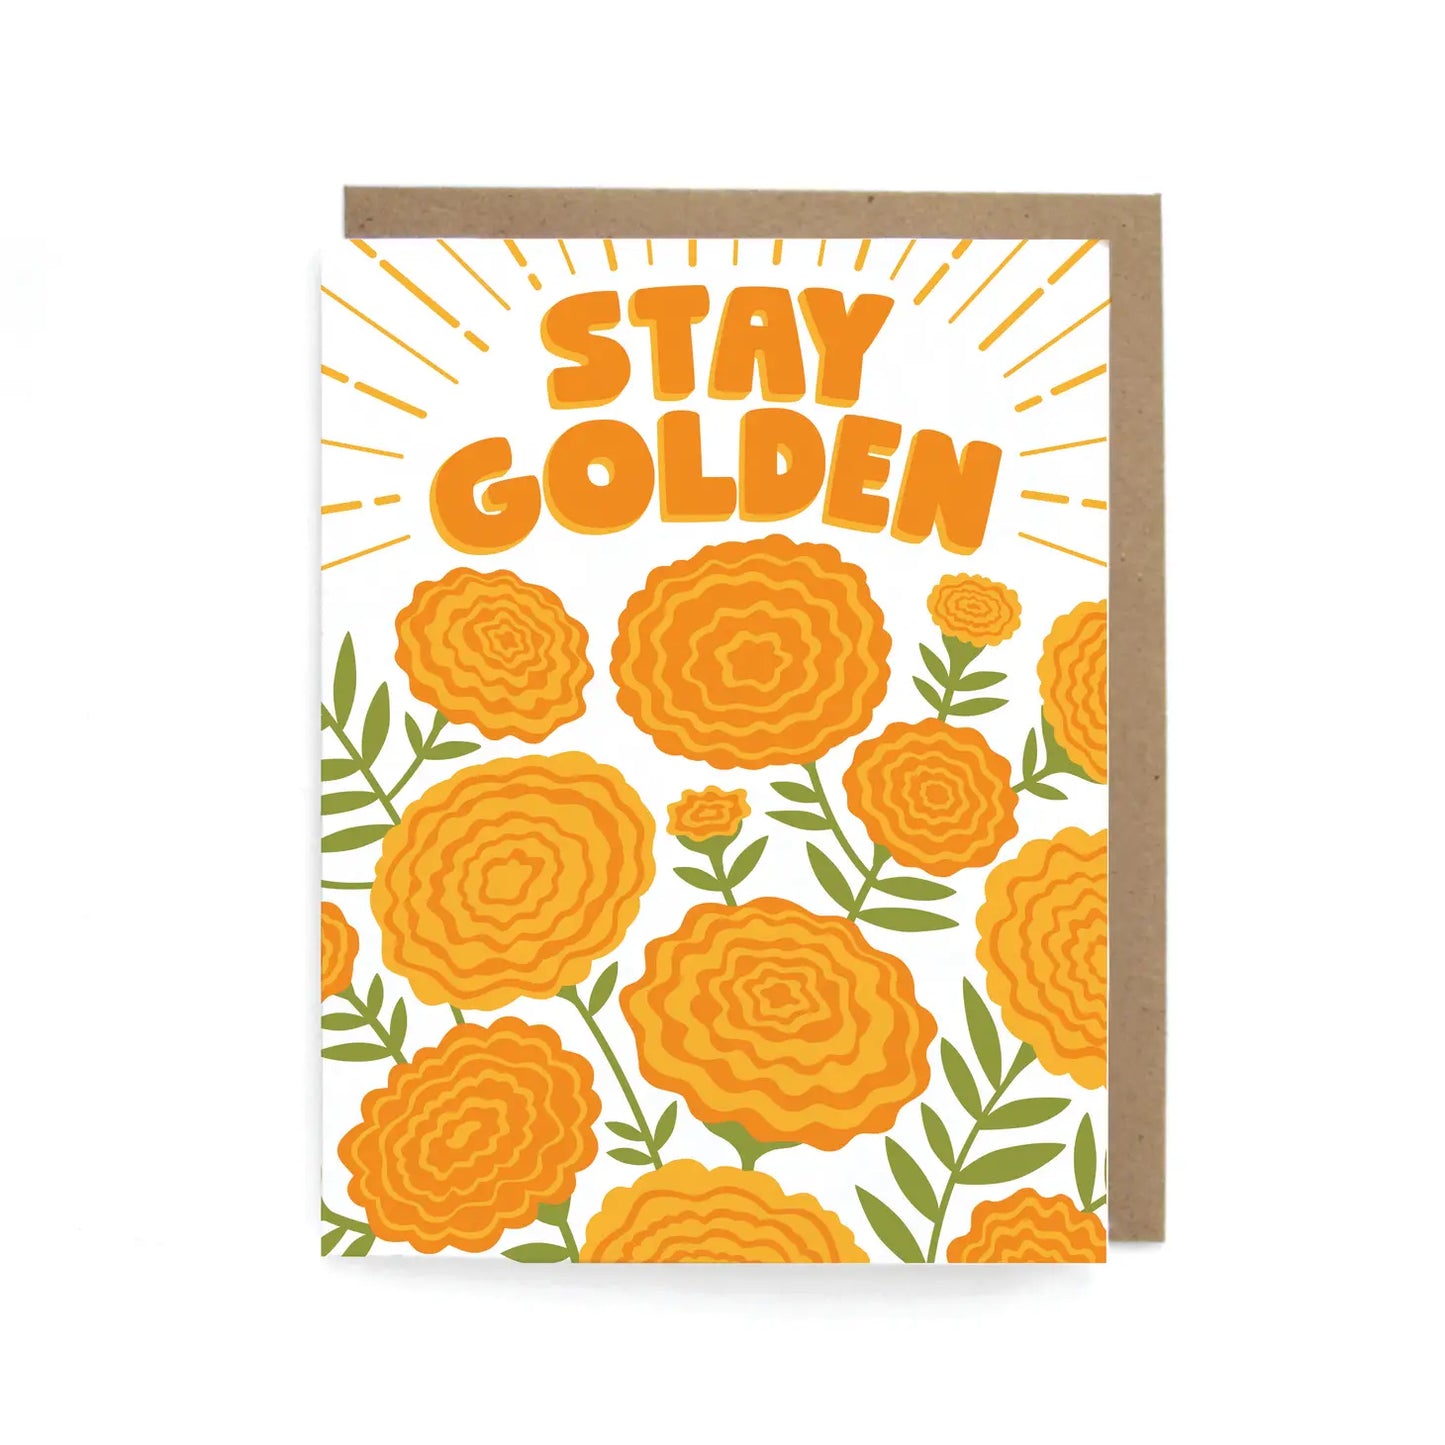 Stay Golden Marigold Card - Moon Room Shop and Wellness